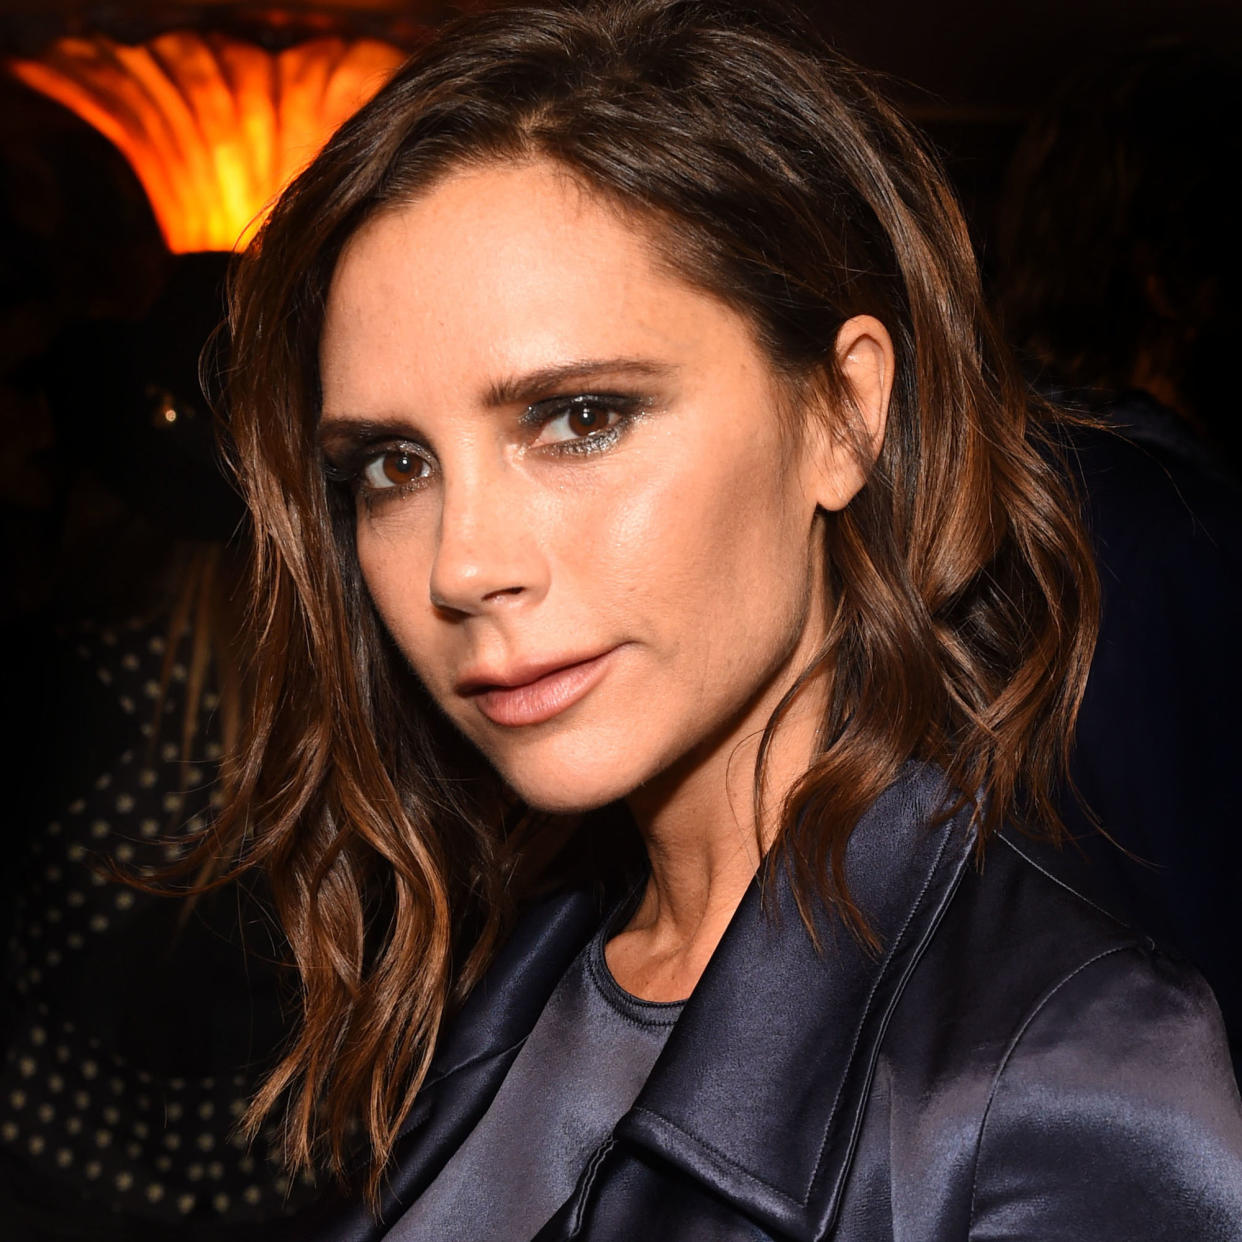 Victoria Beckham Admits She Regrets Breast Implants—and Shes Not Alone